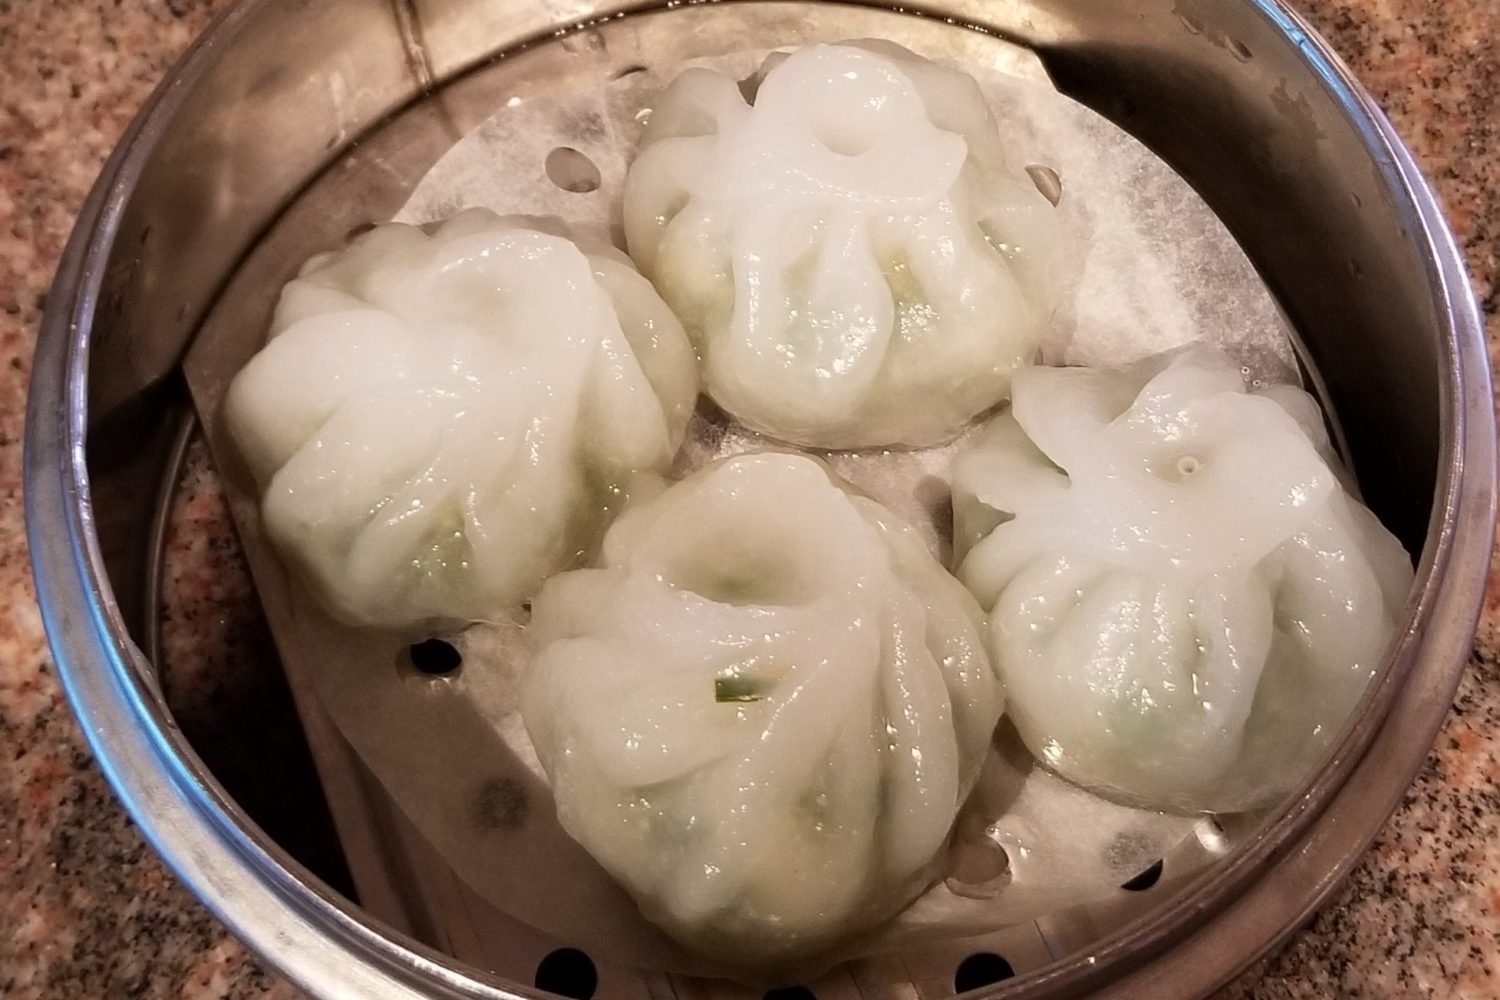 Steamed Shrimp and Bloom of Chives Dumpling at Gourmet Inspirations. Photograph courtesy of Andrew Quach.